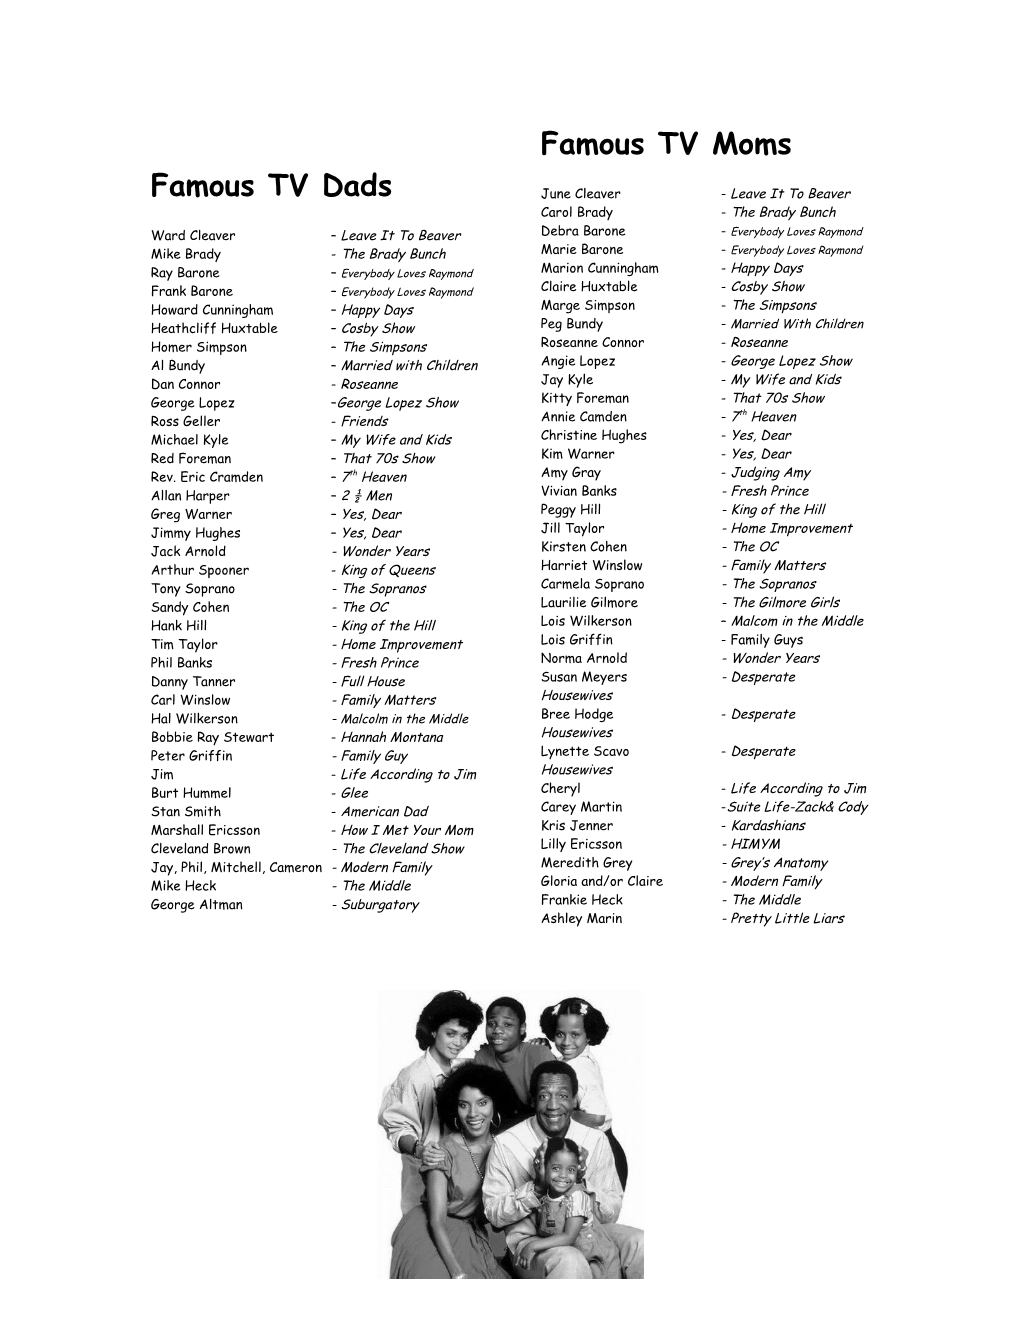 Famous TV Dads